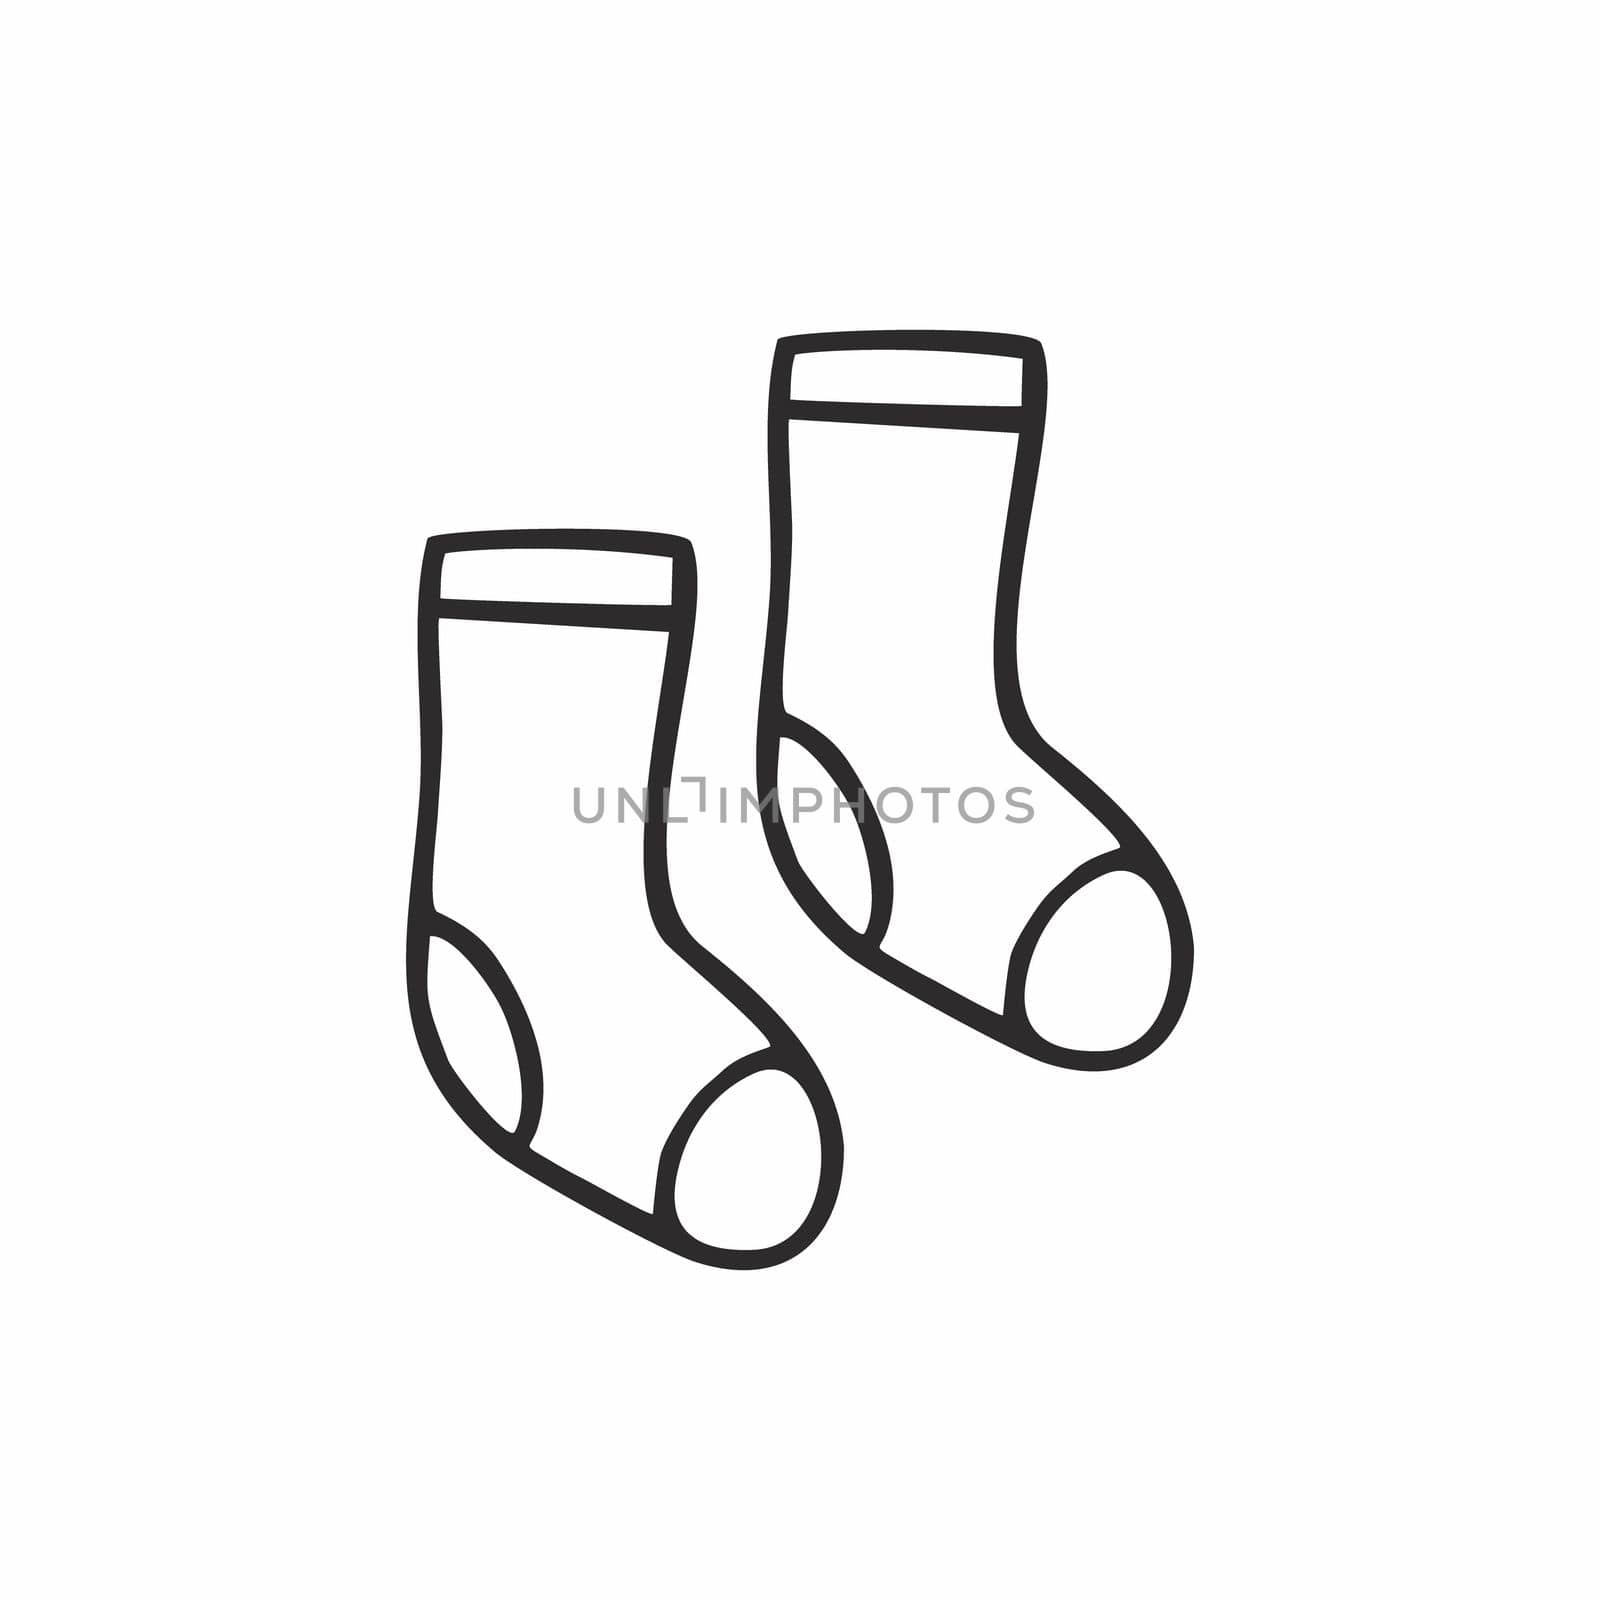 Two Doodle socks drawn with a single black contour line. Vector hand-drawn illustrations. Icon, pictogram, single element design.